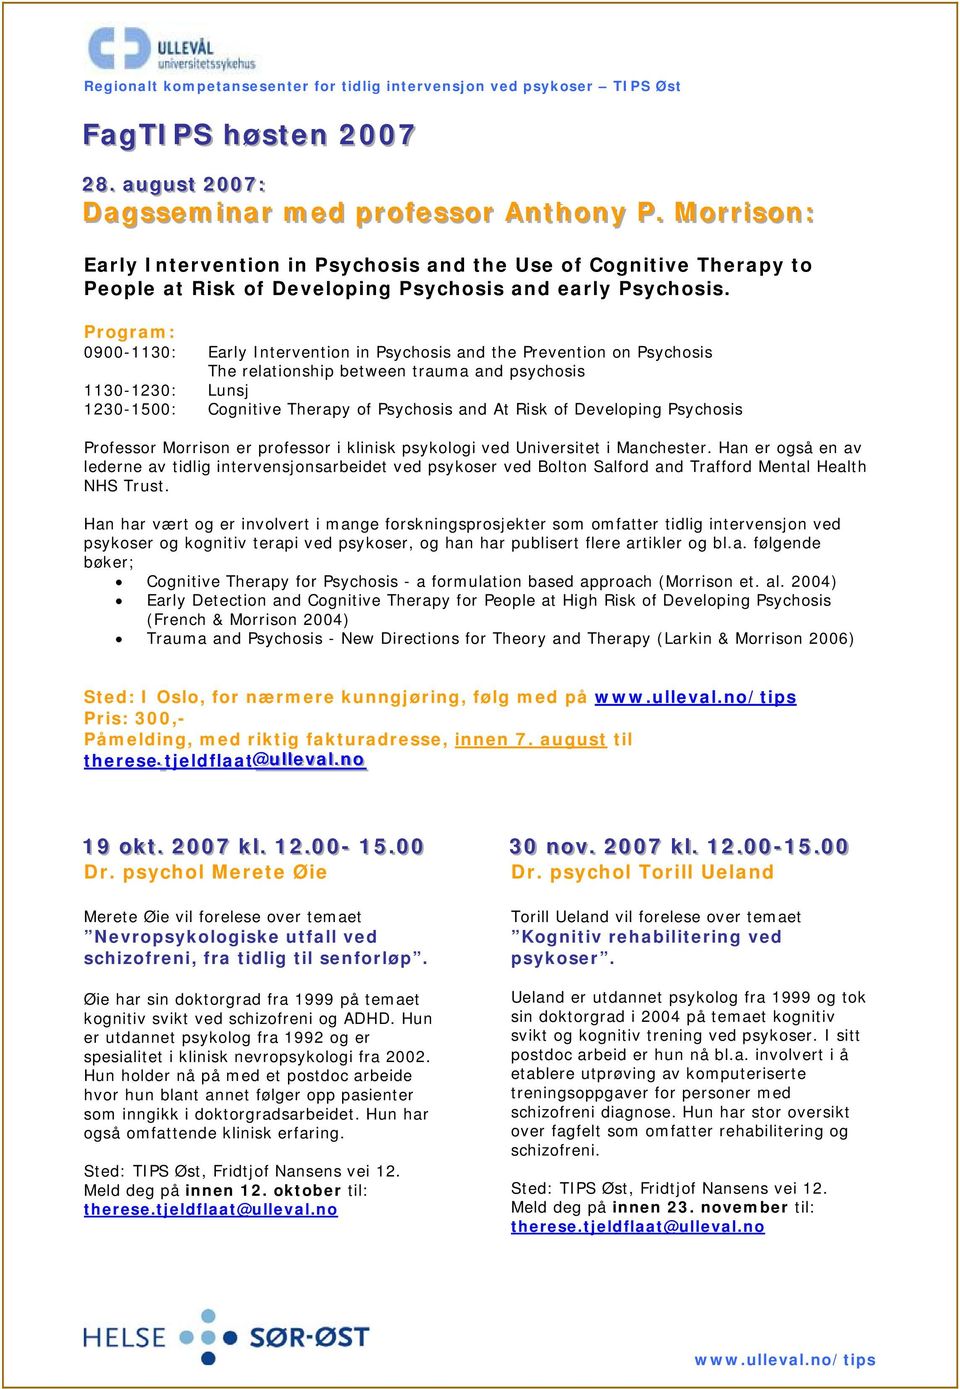 Program: 0900-1130: Early Intervention in Psychosis and the Prevention on Psychosis The relationship between trauma and psychosis 1130-1230: Lunsj 1230-1500: Cognitive Therapy of Psychosis and At